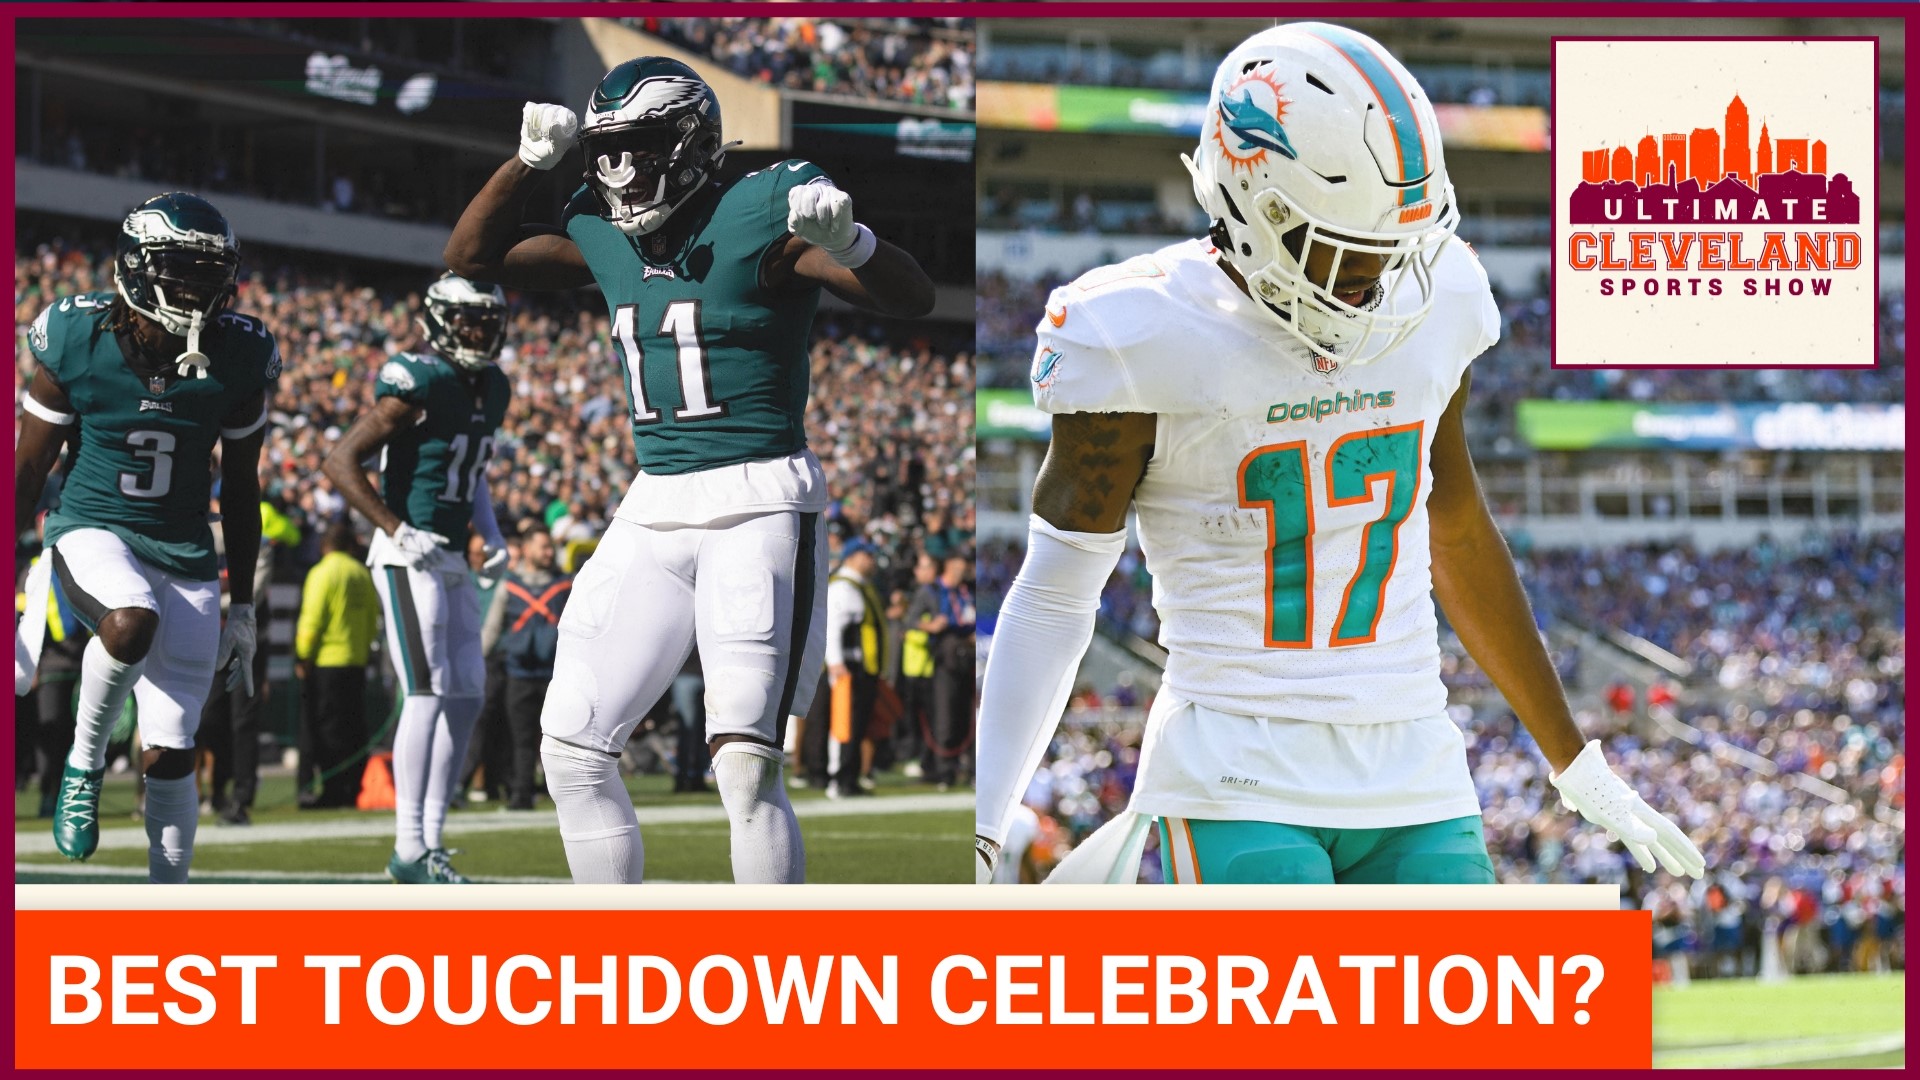 What touchdown celebration has been the coolest in the NFL so far?